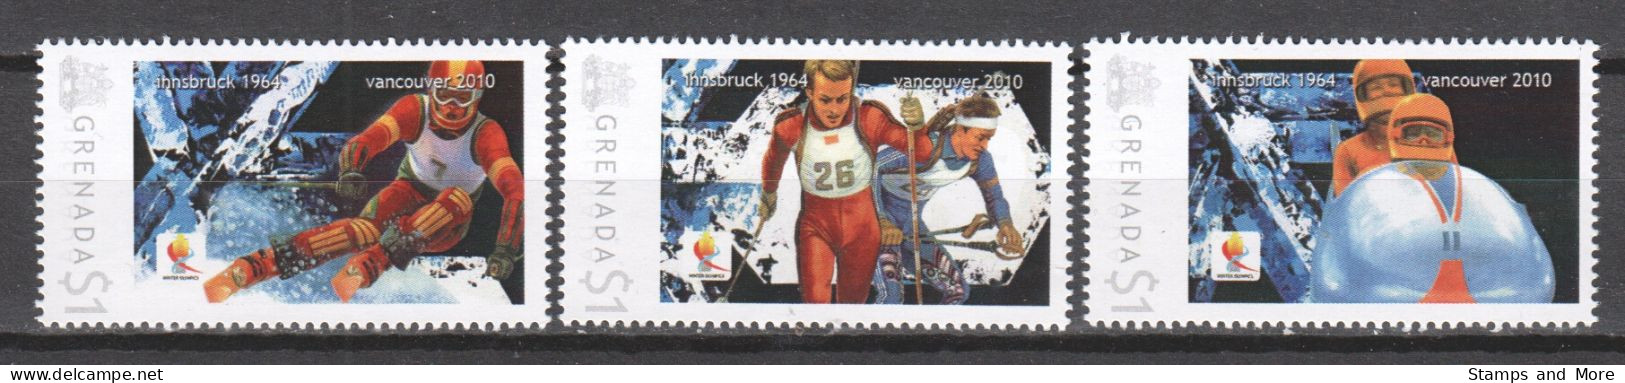 Grenada - Limited Edition Serie 09 MNH - WINTER OLYMPICS VANCOUVER 2010 - INNSBRUCK 1964 - Winter 2010: Vancouver